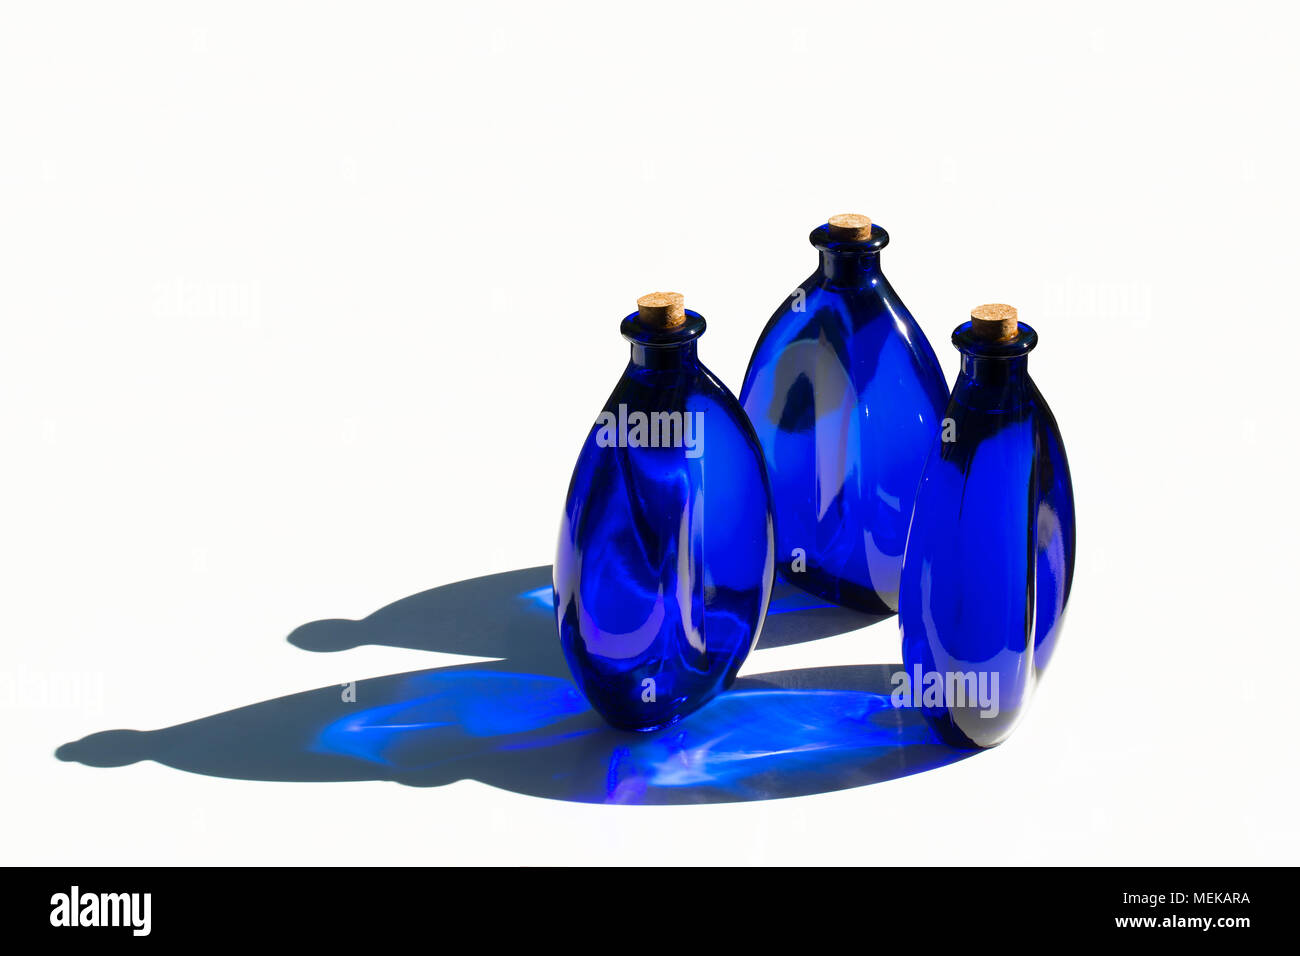 Blue solar water in blue glass bottles sealed with cork stoppers. Isolated on white background. Stock Photo